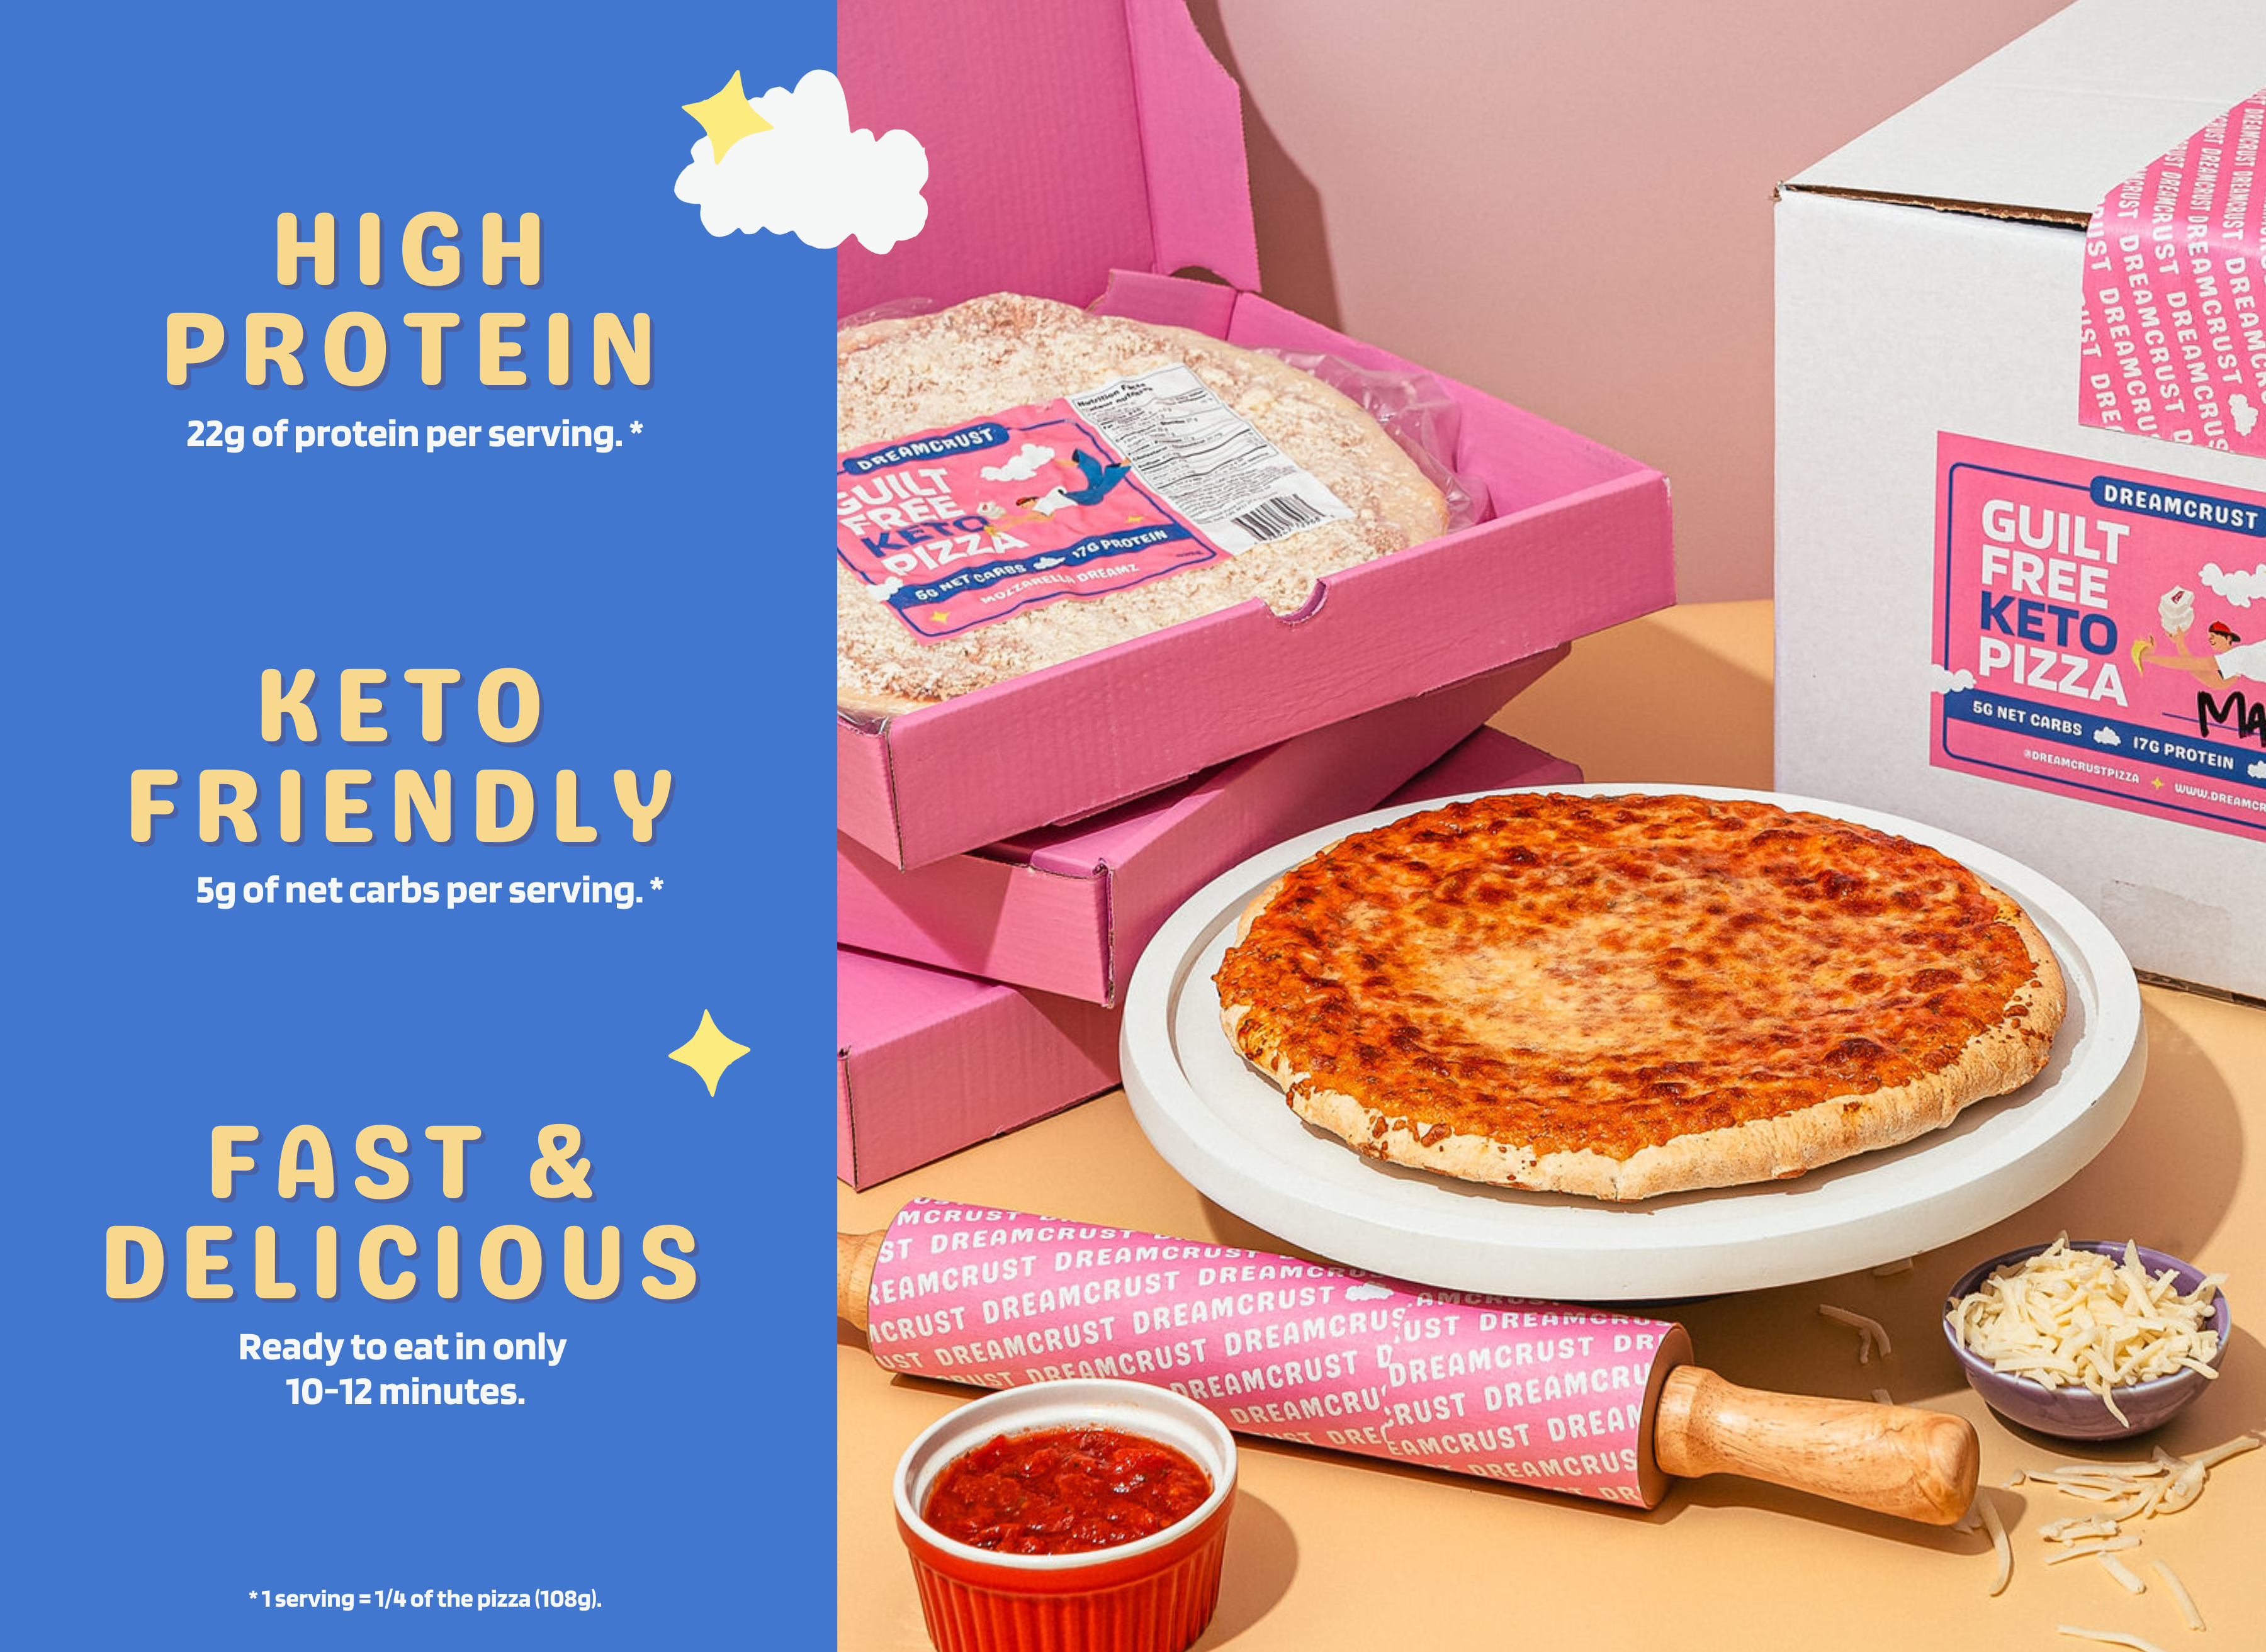 A dreamworthy, 11-inch, guilt-free pizza with 17 grams of protein, 22 grams of fibre, and 5 grams of net carbs.